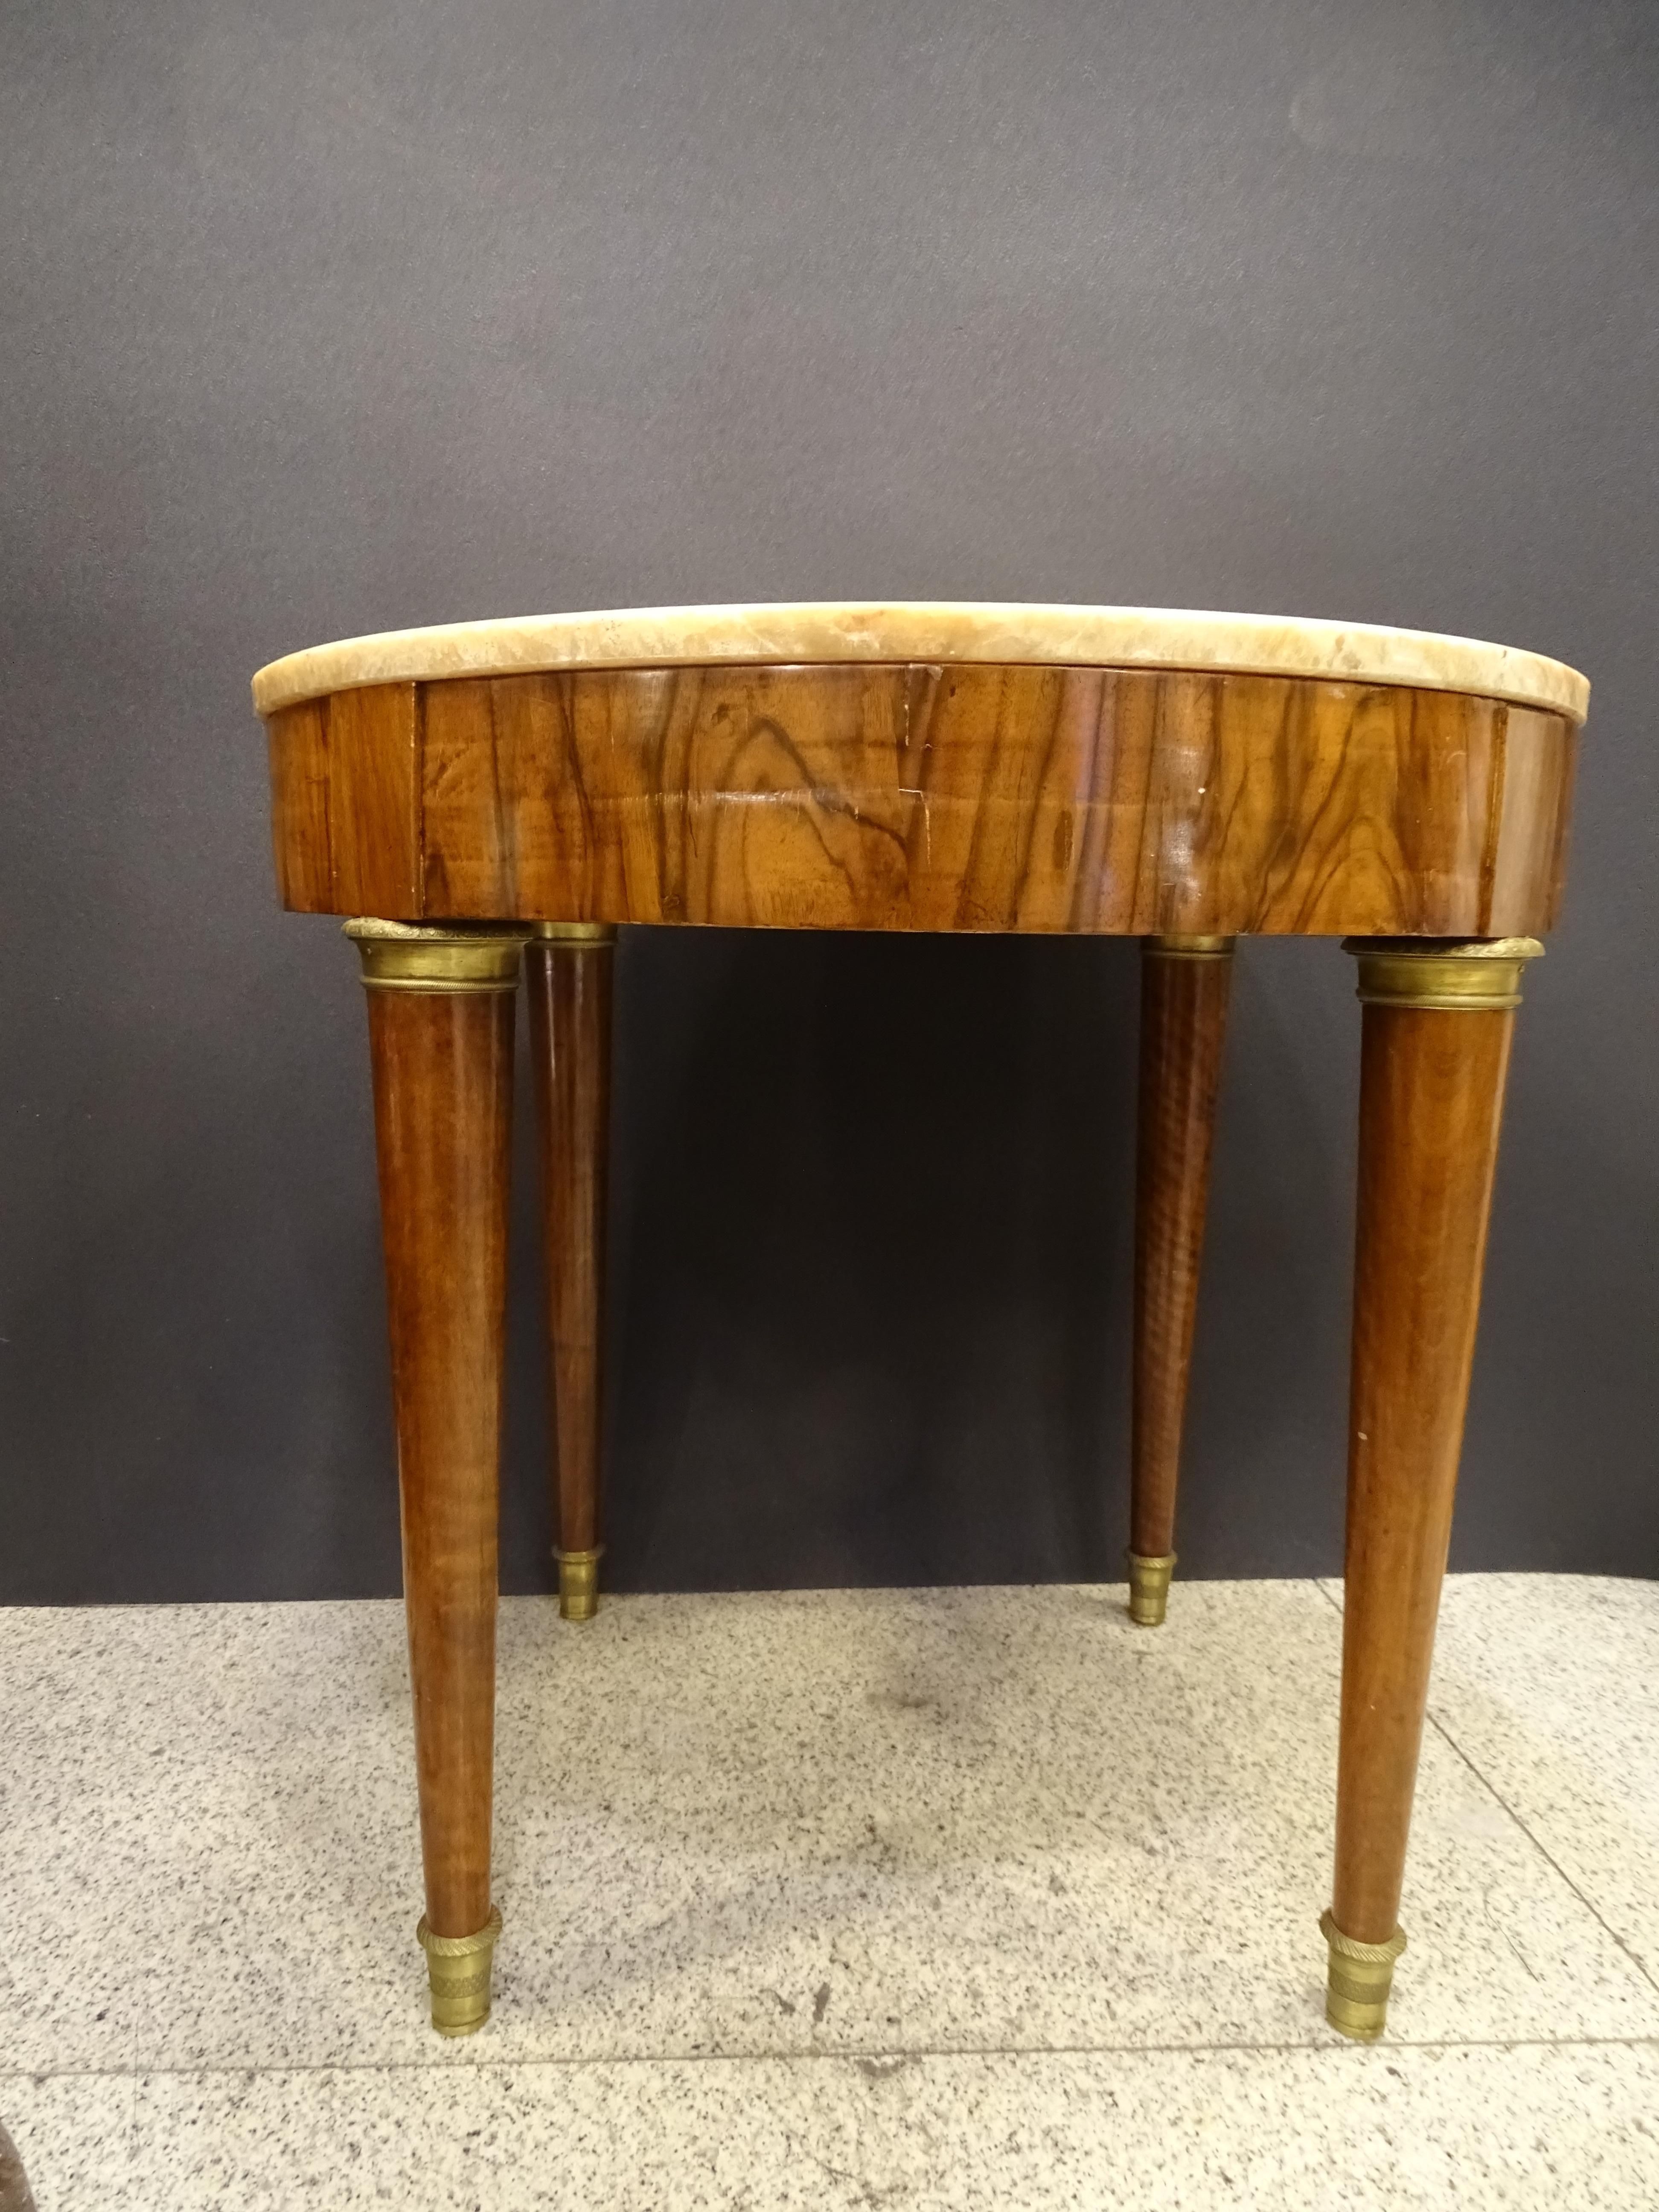 Outstanding and very refined  Gueridon Louis XVI, France, PP S XIX.
Gueridon or pedestal table with a circular profile and generous measurements, refined lines following the  aesthetic discourse of the Louis XVI style, is supported on 4 cylindrical